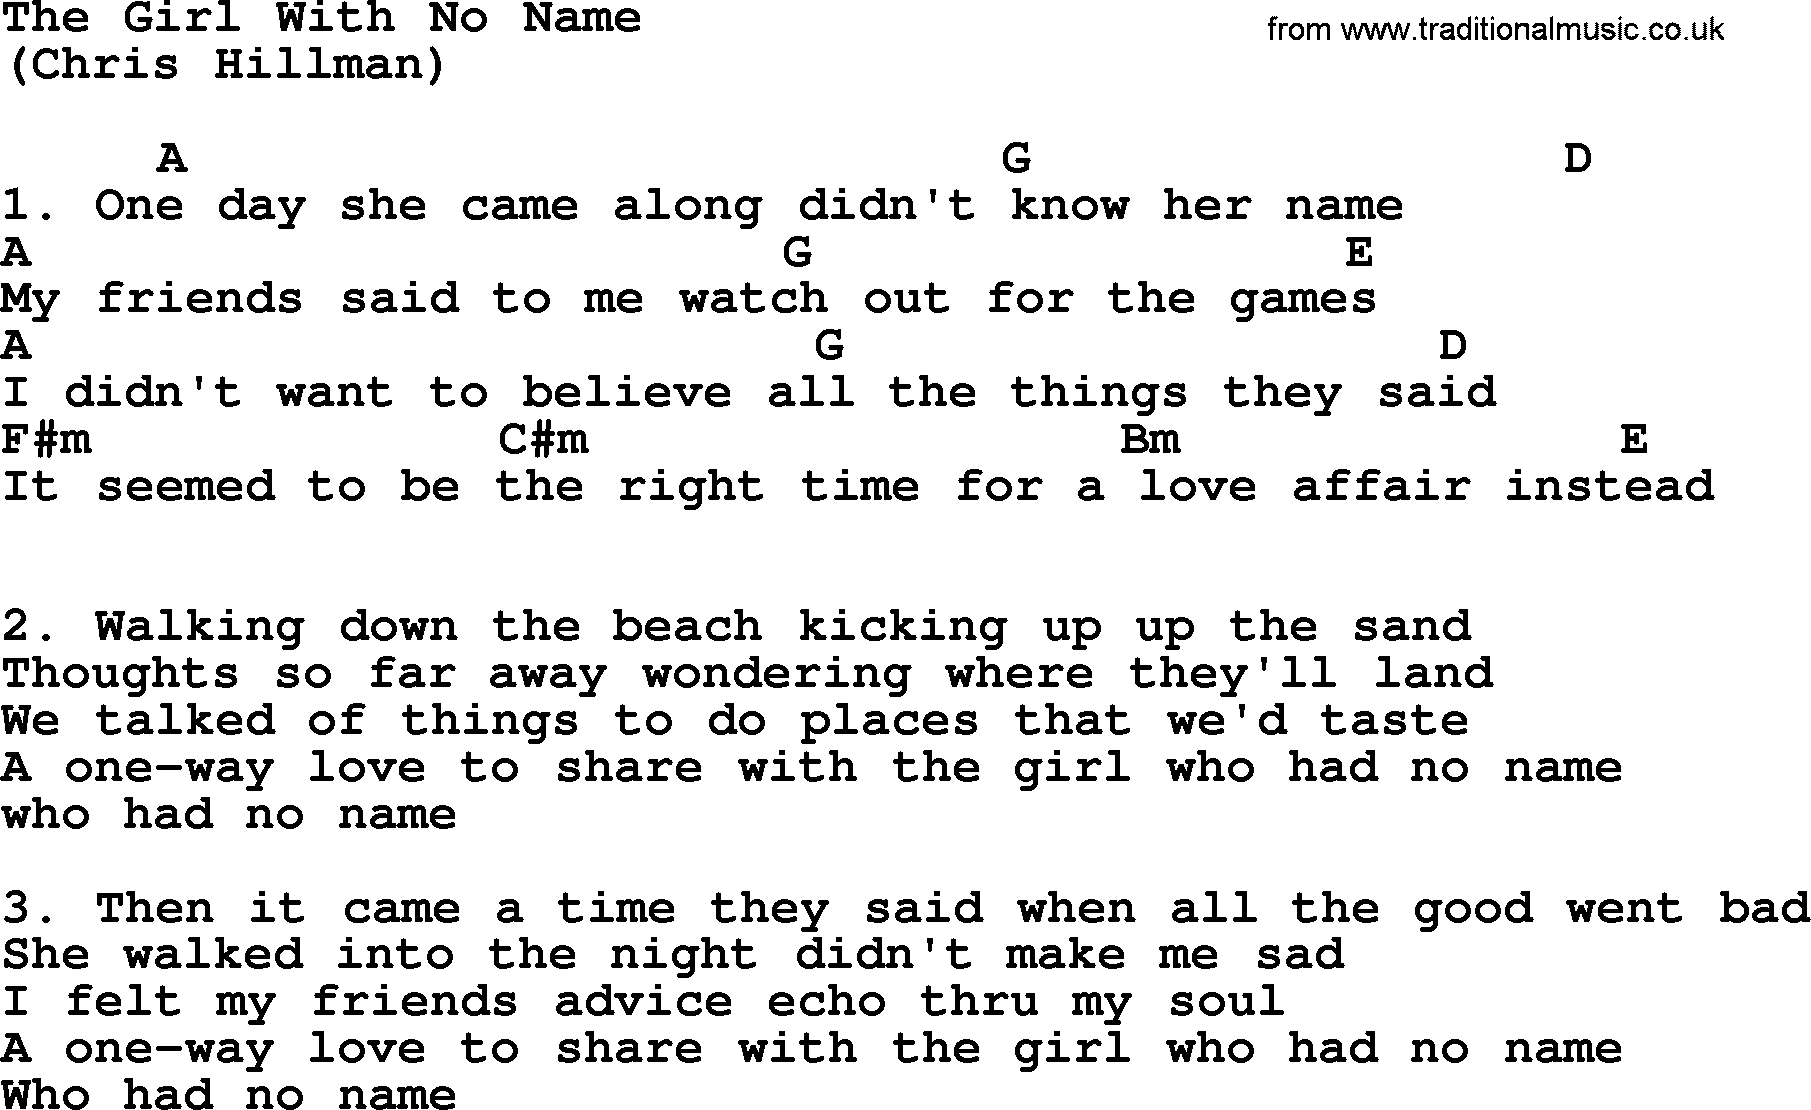 The Byrds song The Girl With No Name, lyrics and chords